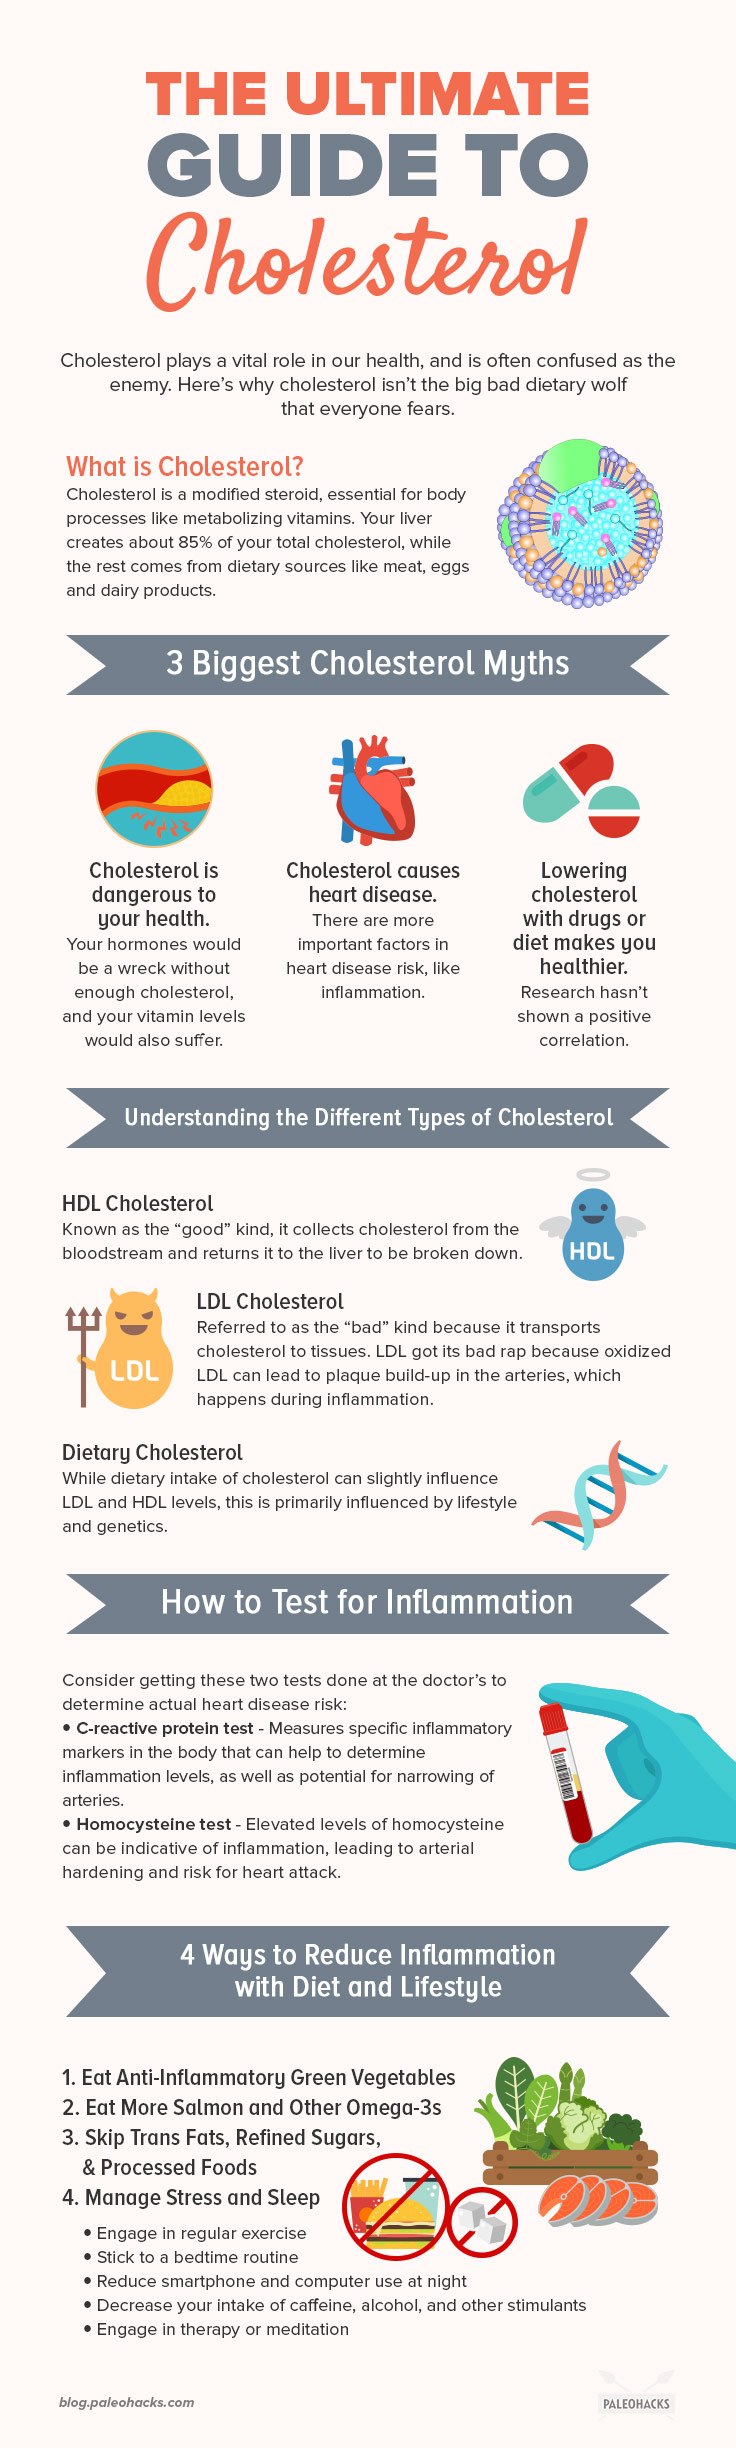 Cholesterol plays a vital role in our health, and is often confused as the enemy. Here’s the skinny on how cholesterol works and what really causes heart disease.